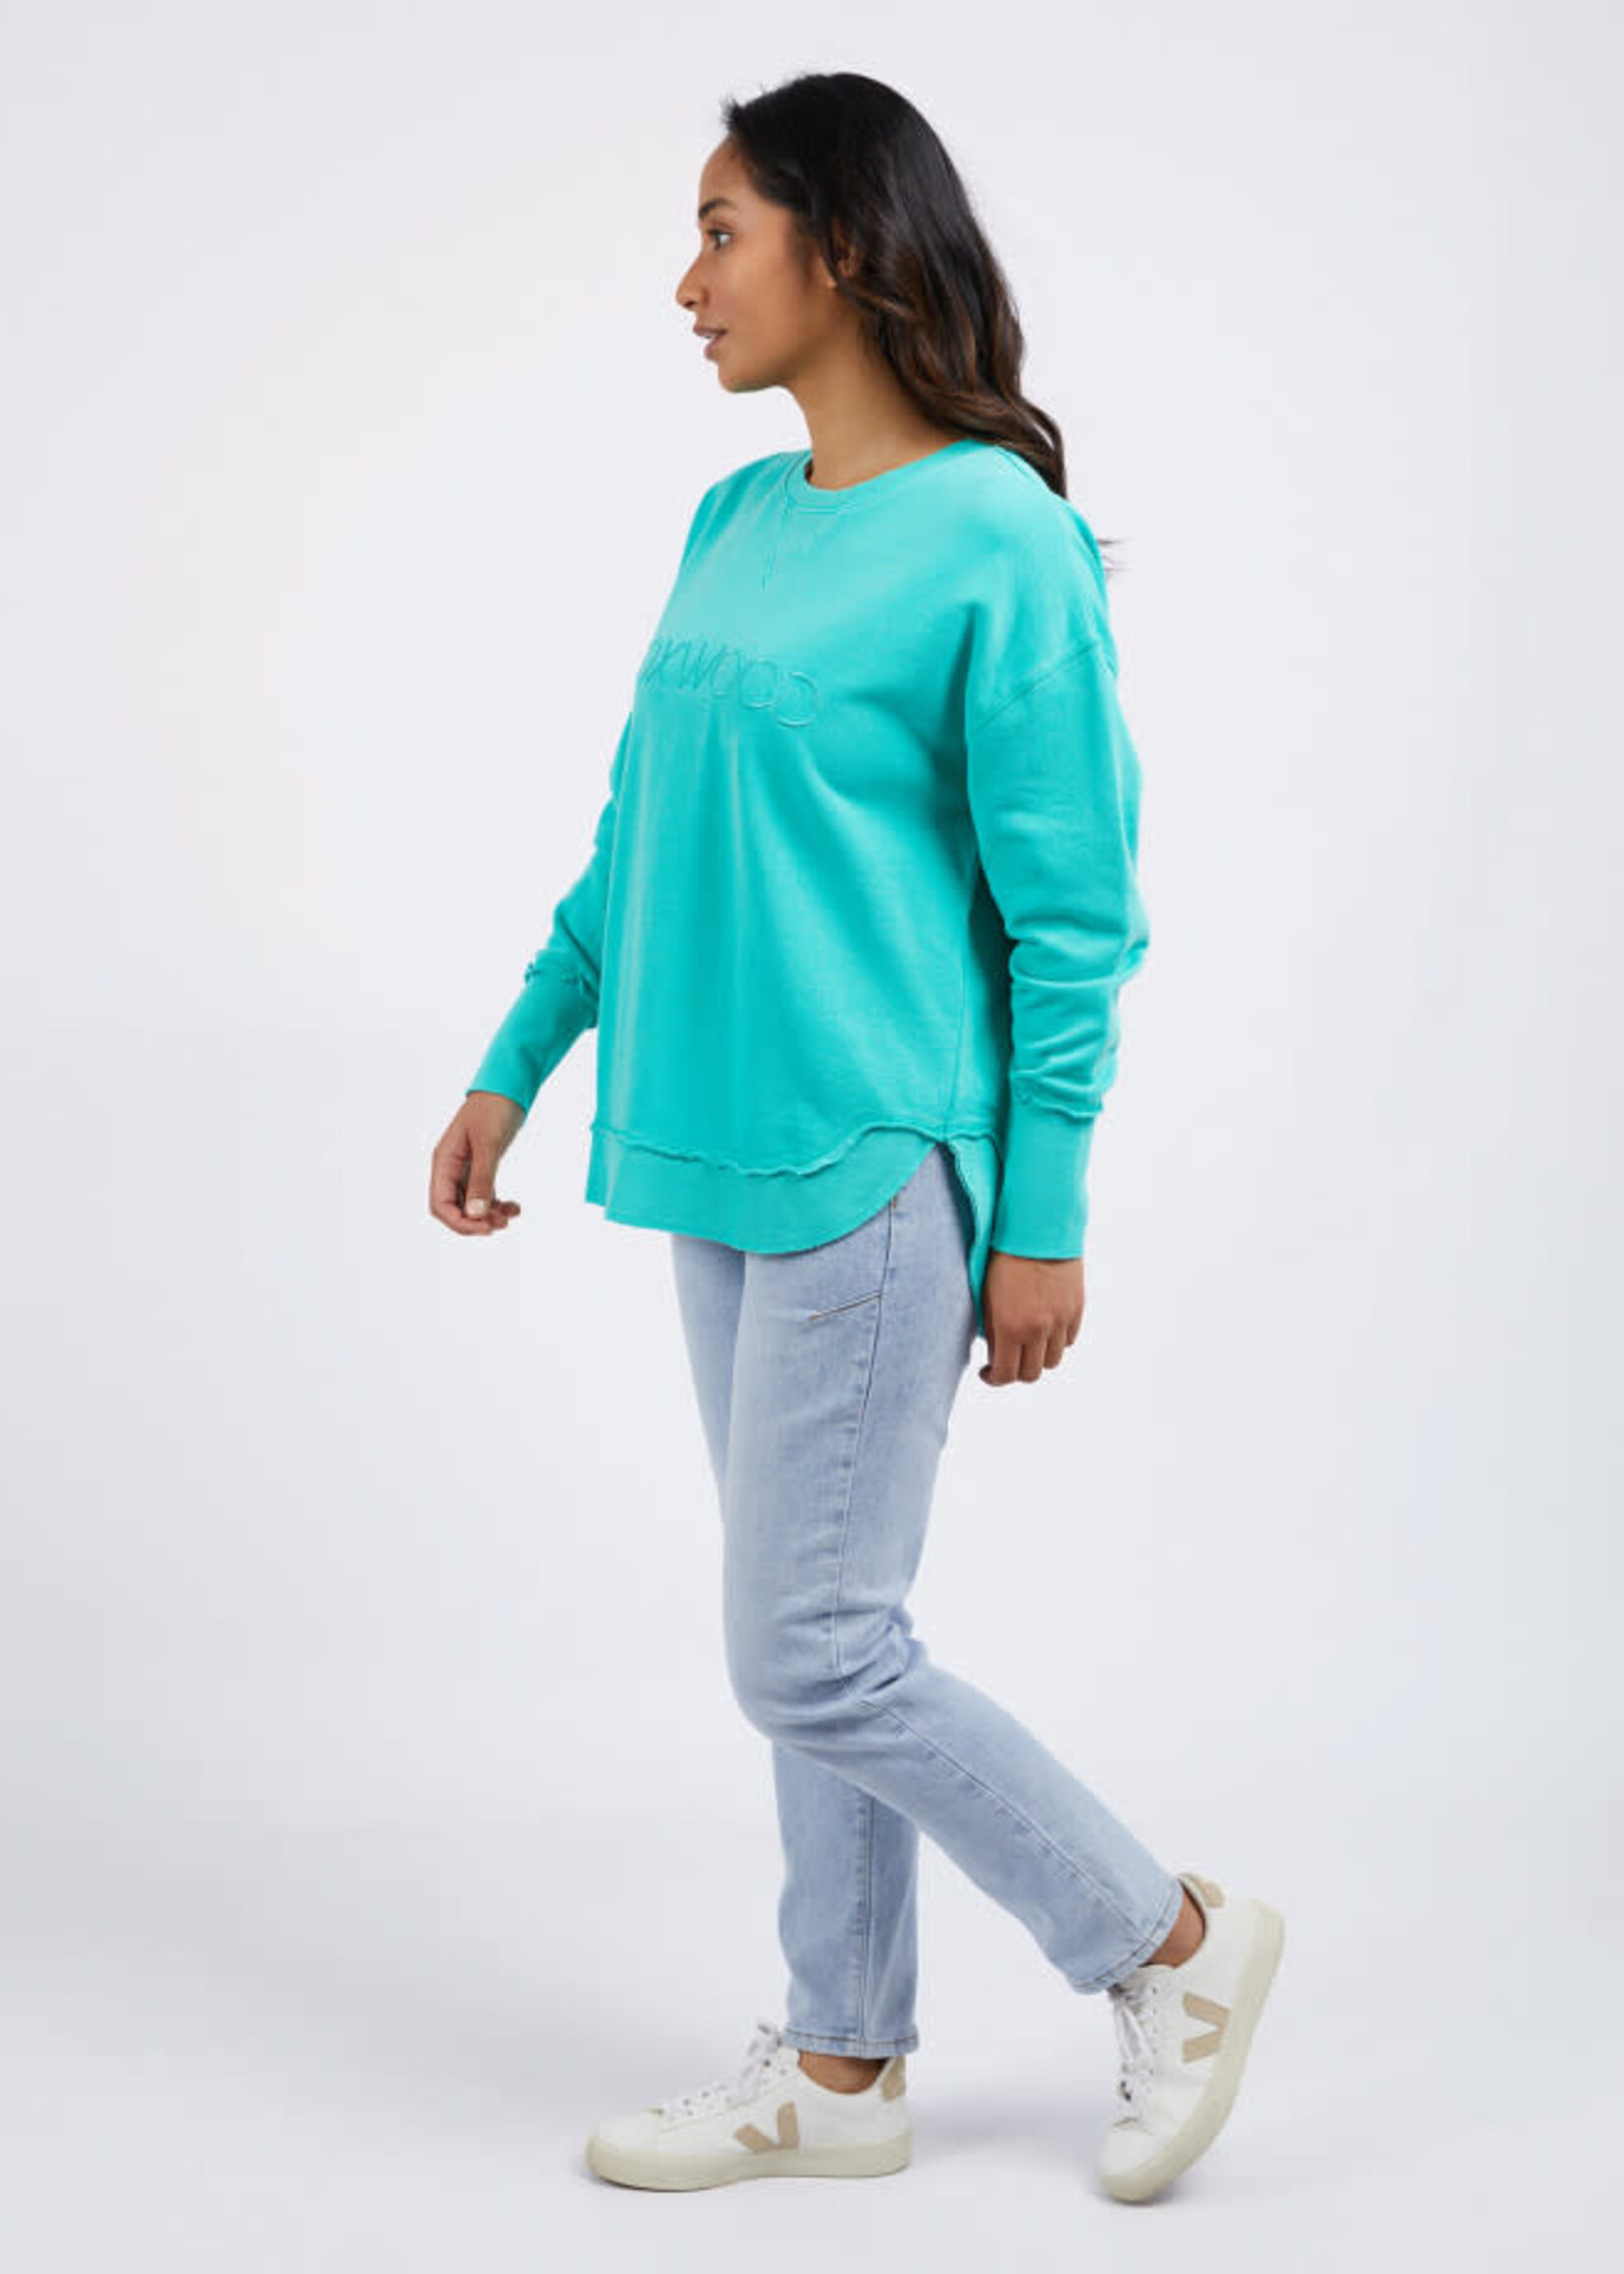 Foxwood Simplified Crew Teal